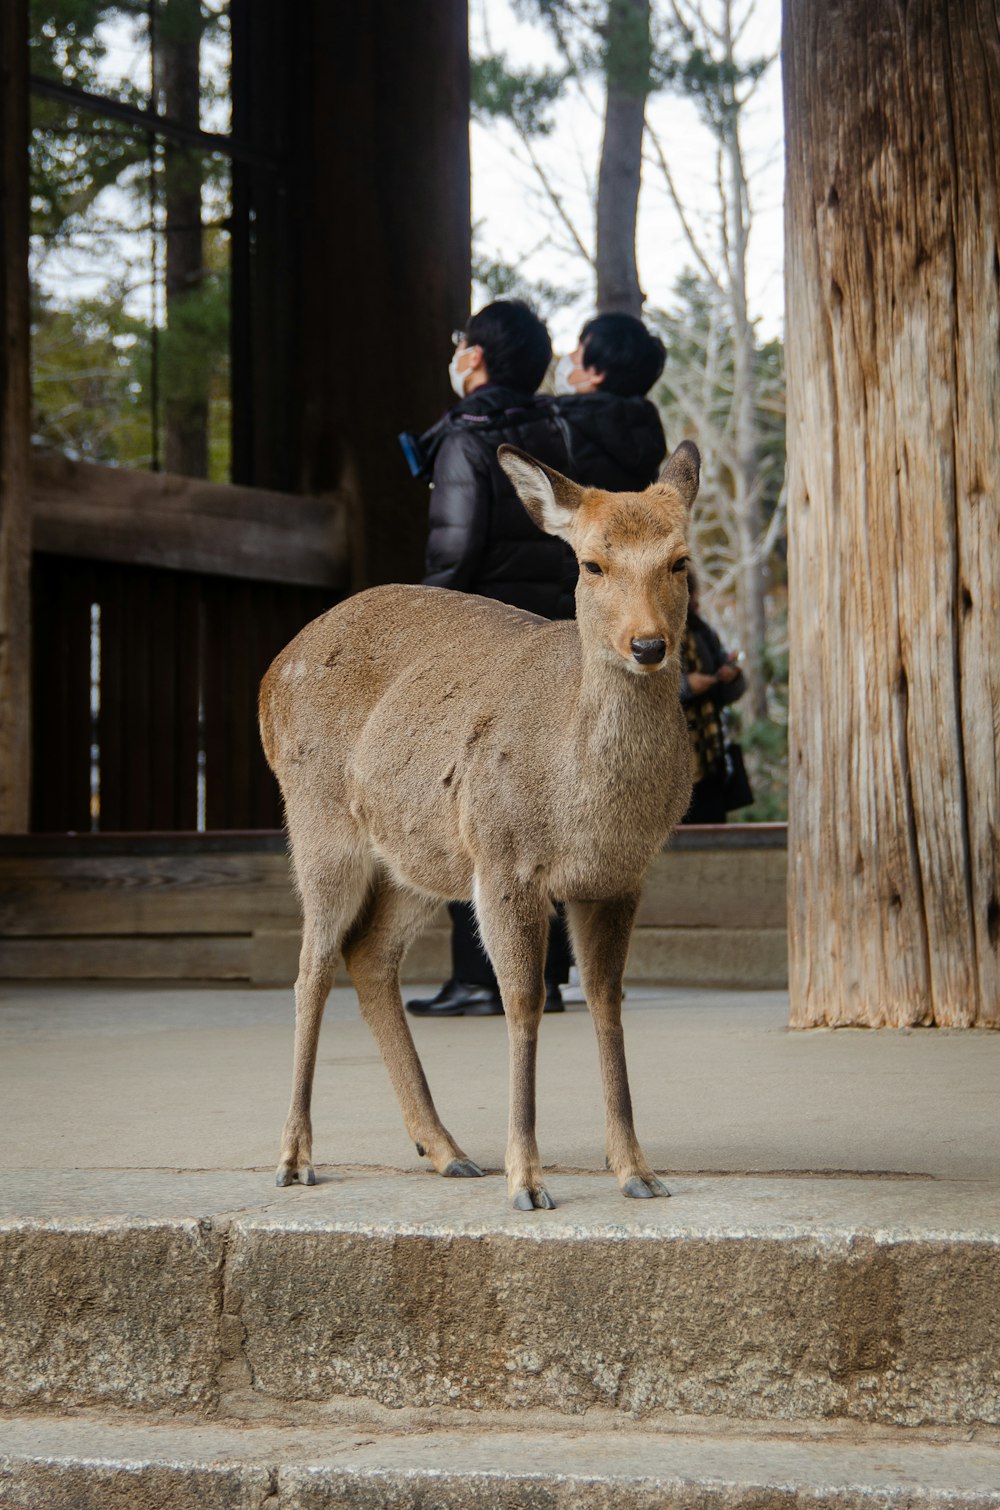 a deer with people in the background